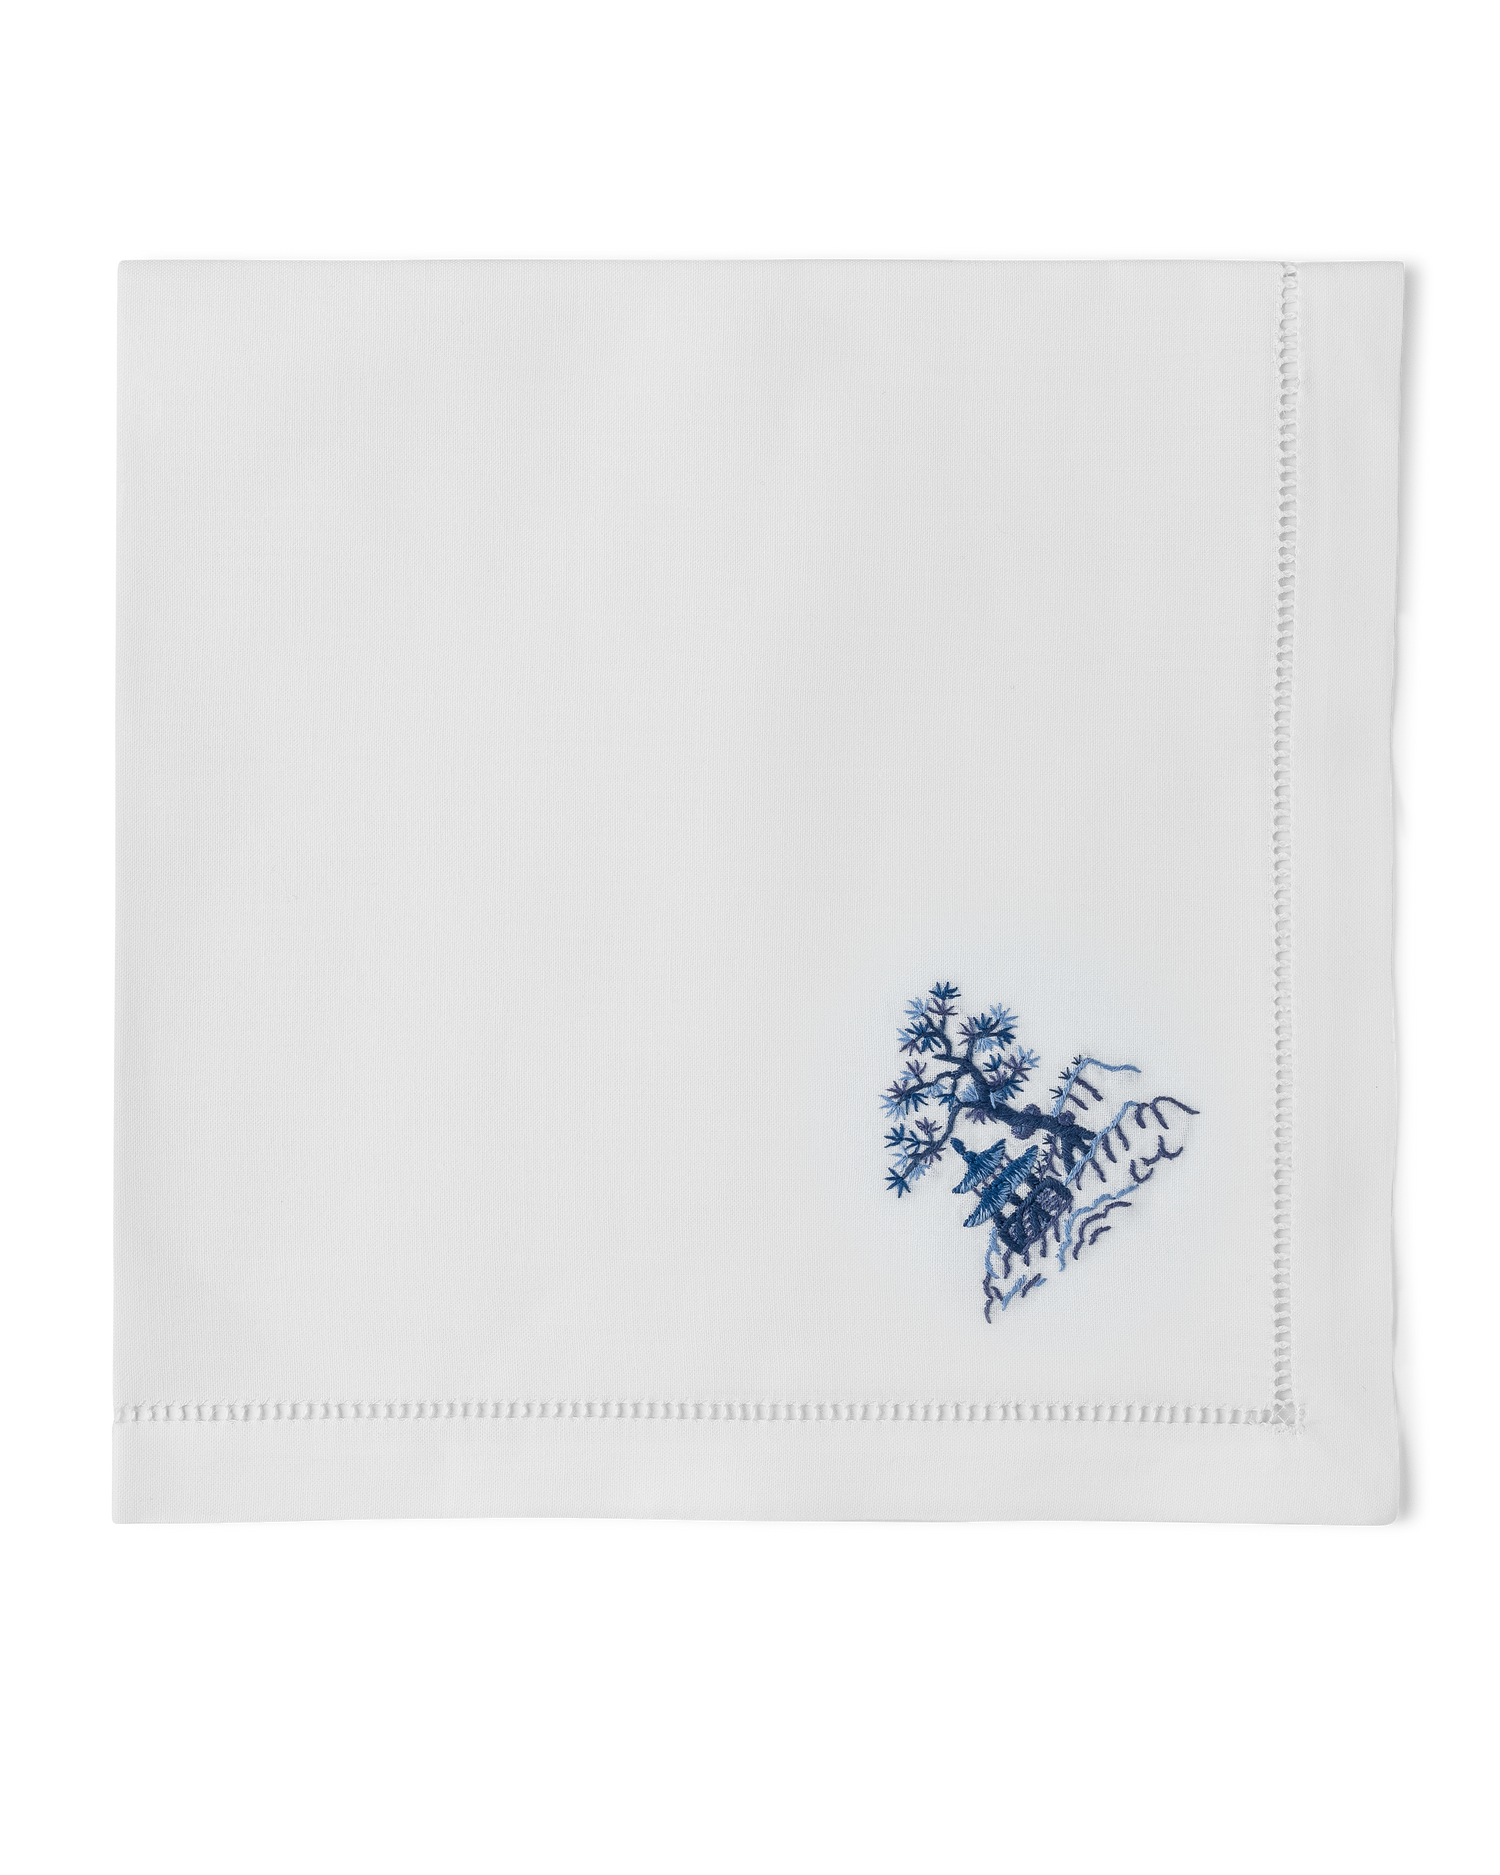 A white napkin with a hemstitch. A house & tree on a hill are embroidered in blue in the bottom righthand corner.